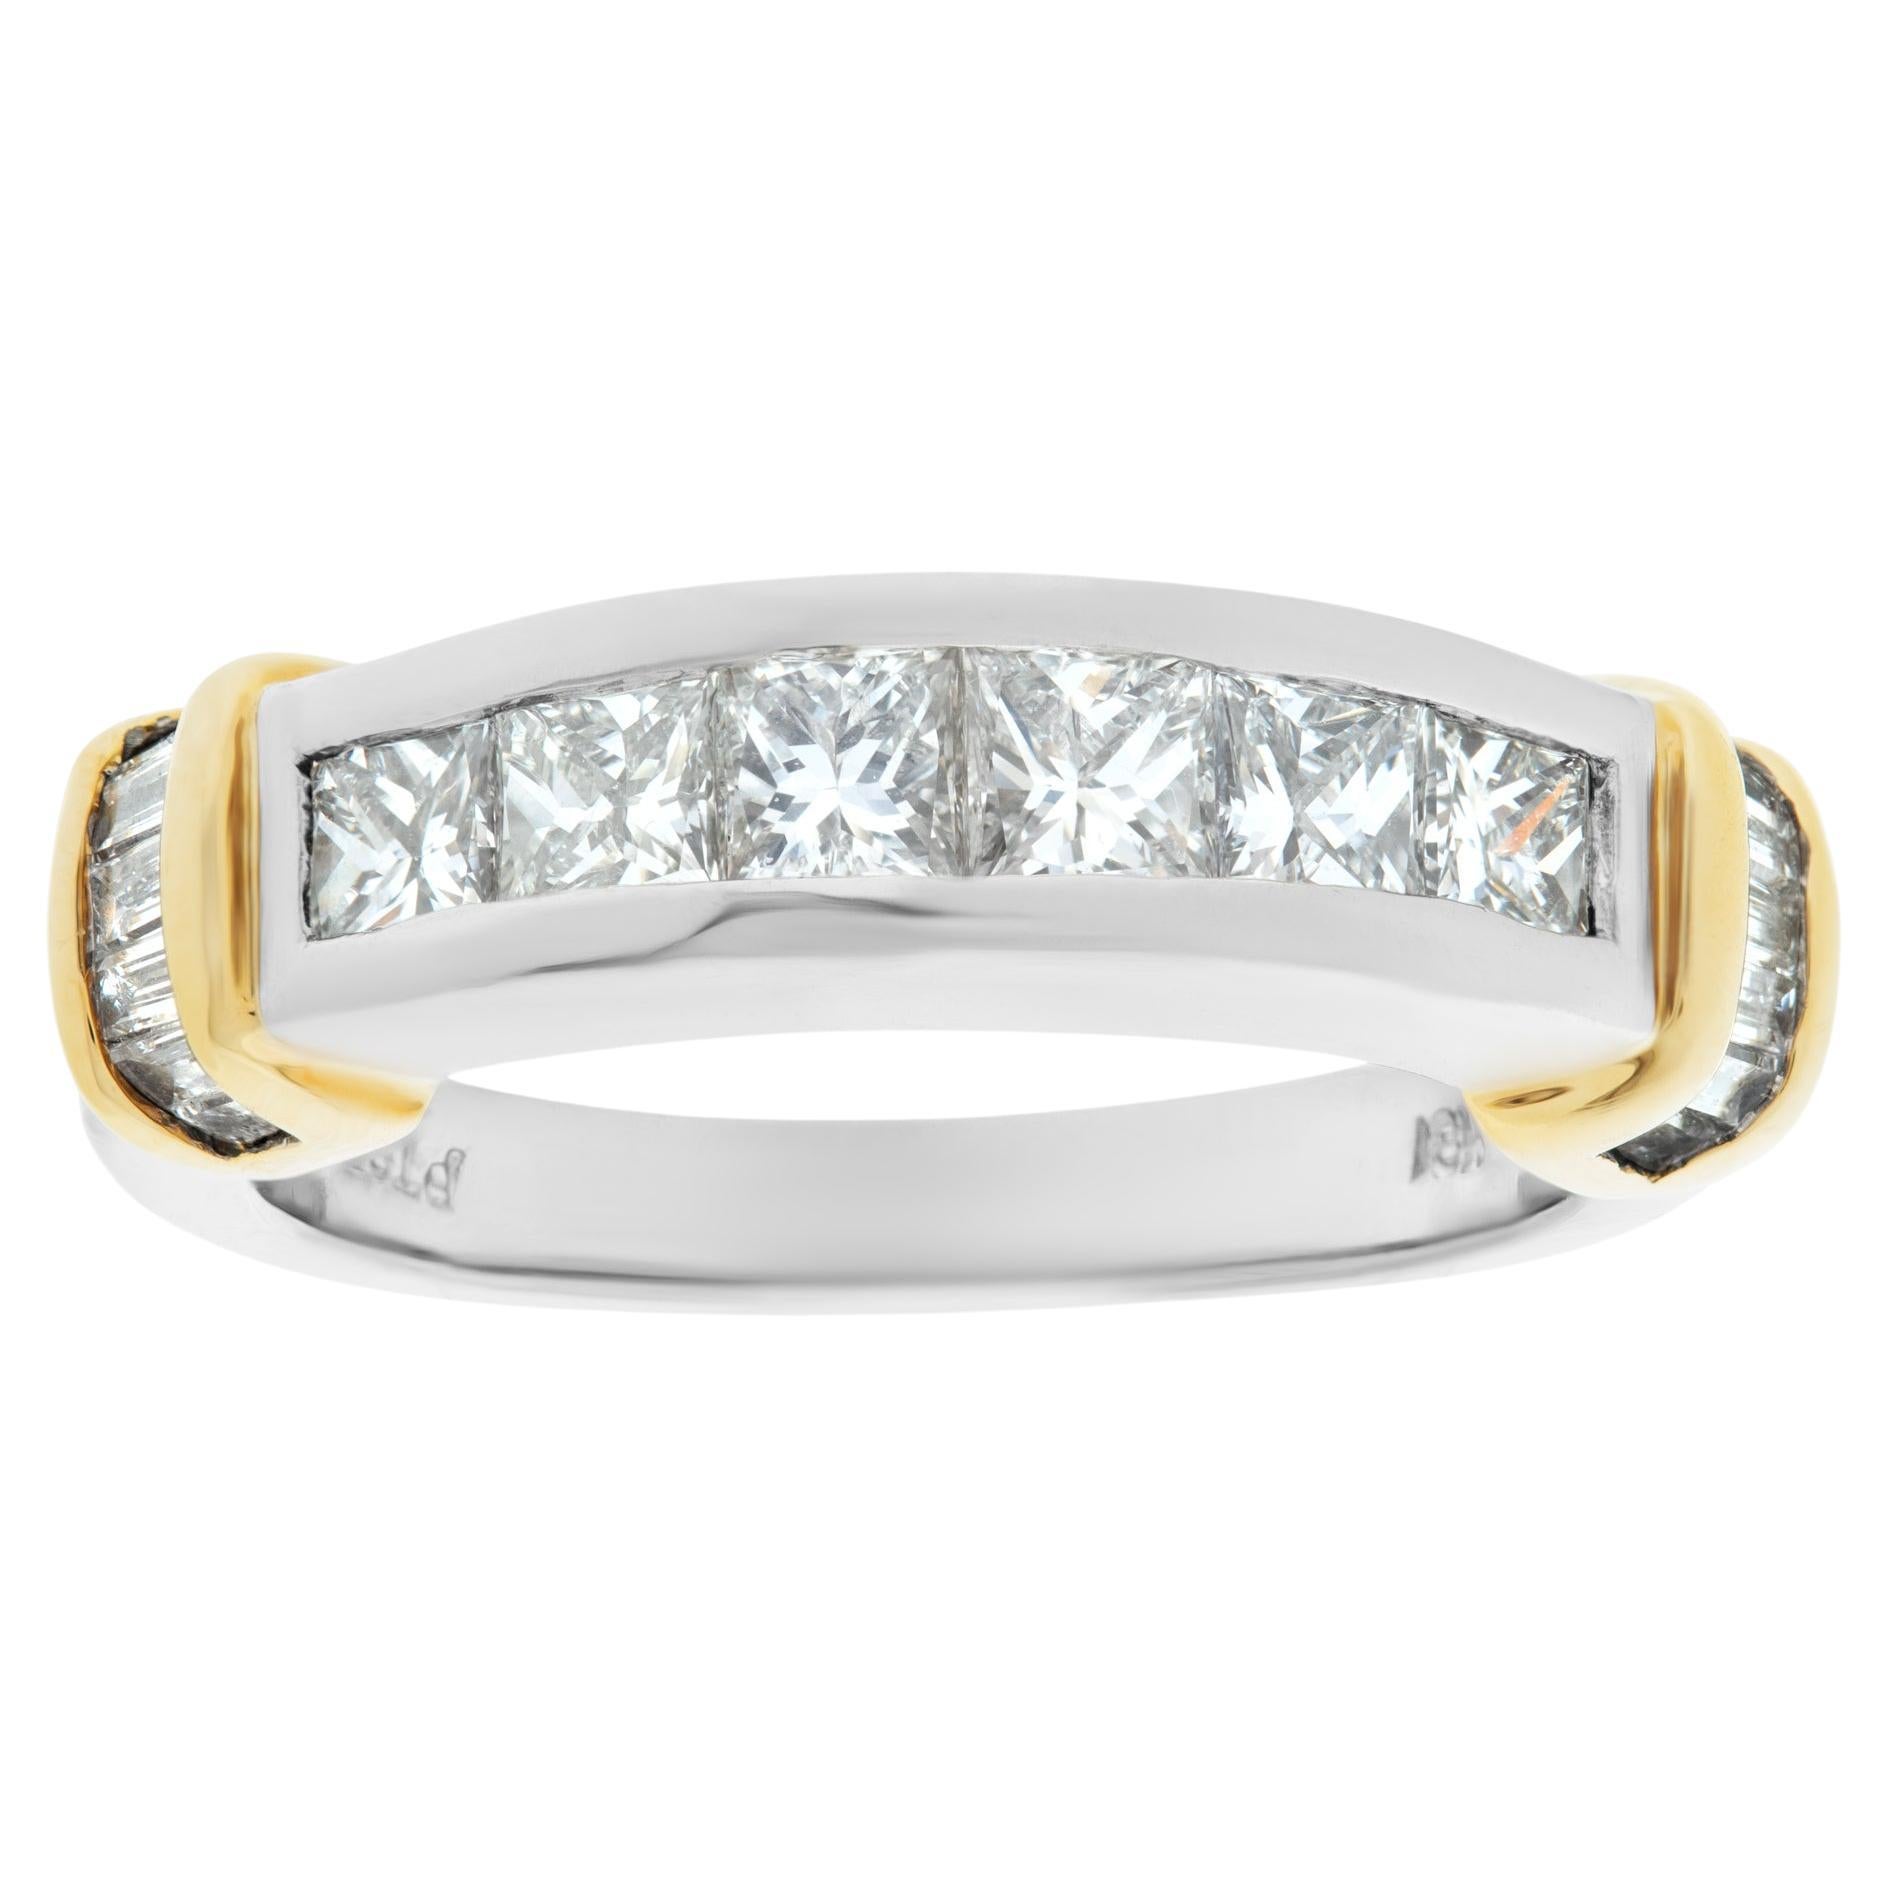 Platinum and 18k Gold Diamond Ring with App. 1.50 Cts in Brilliant Cut  Diamonds For Sale at 1stDibs